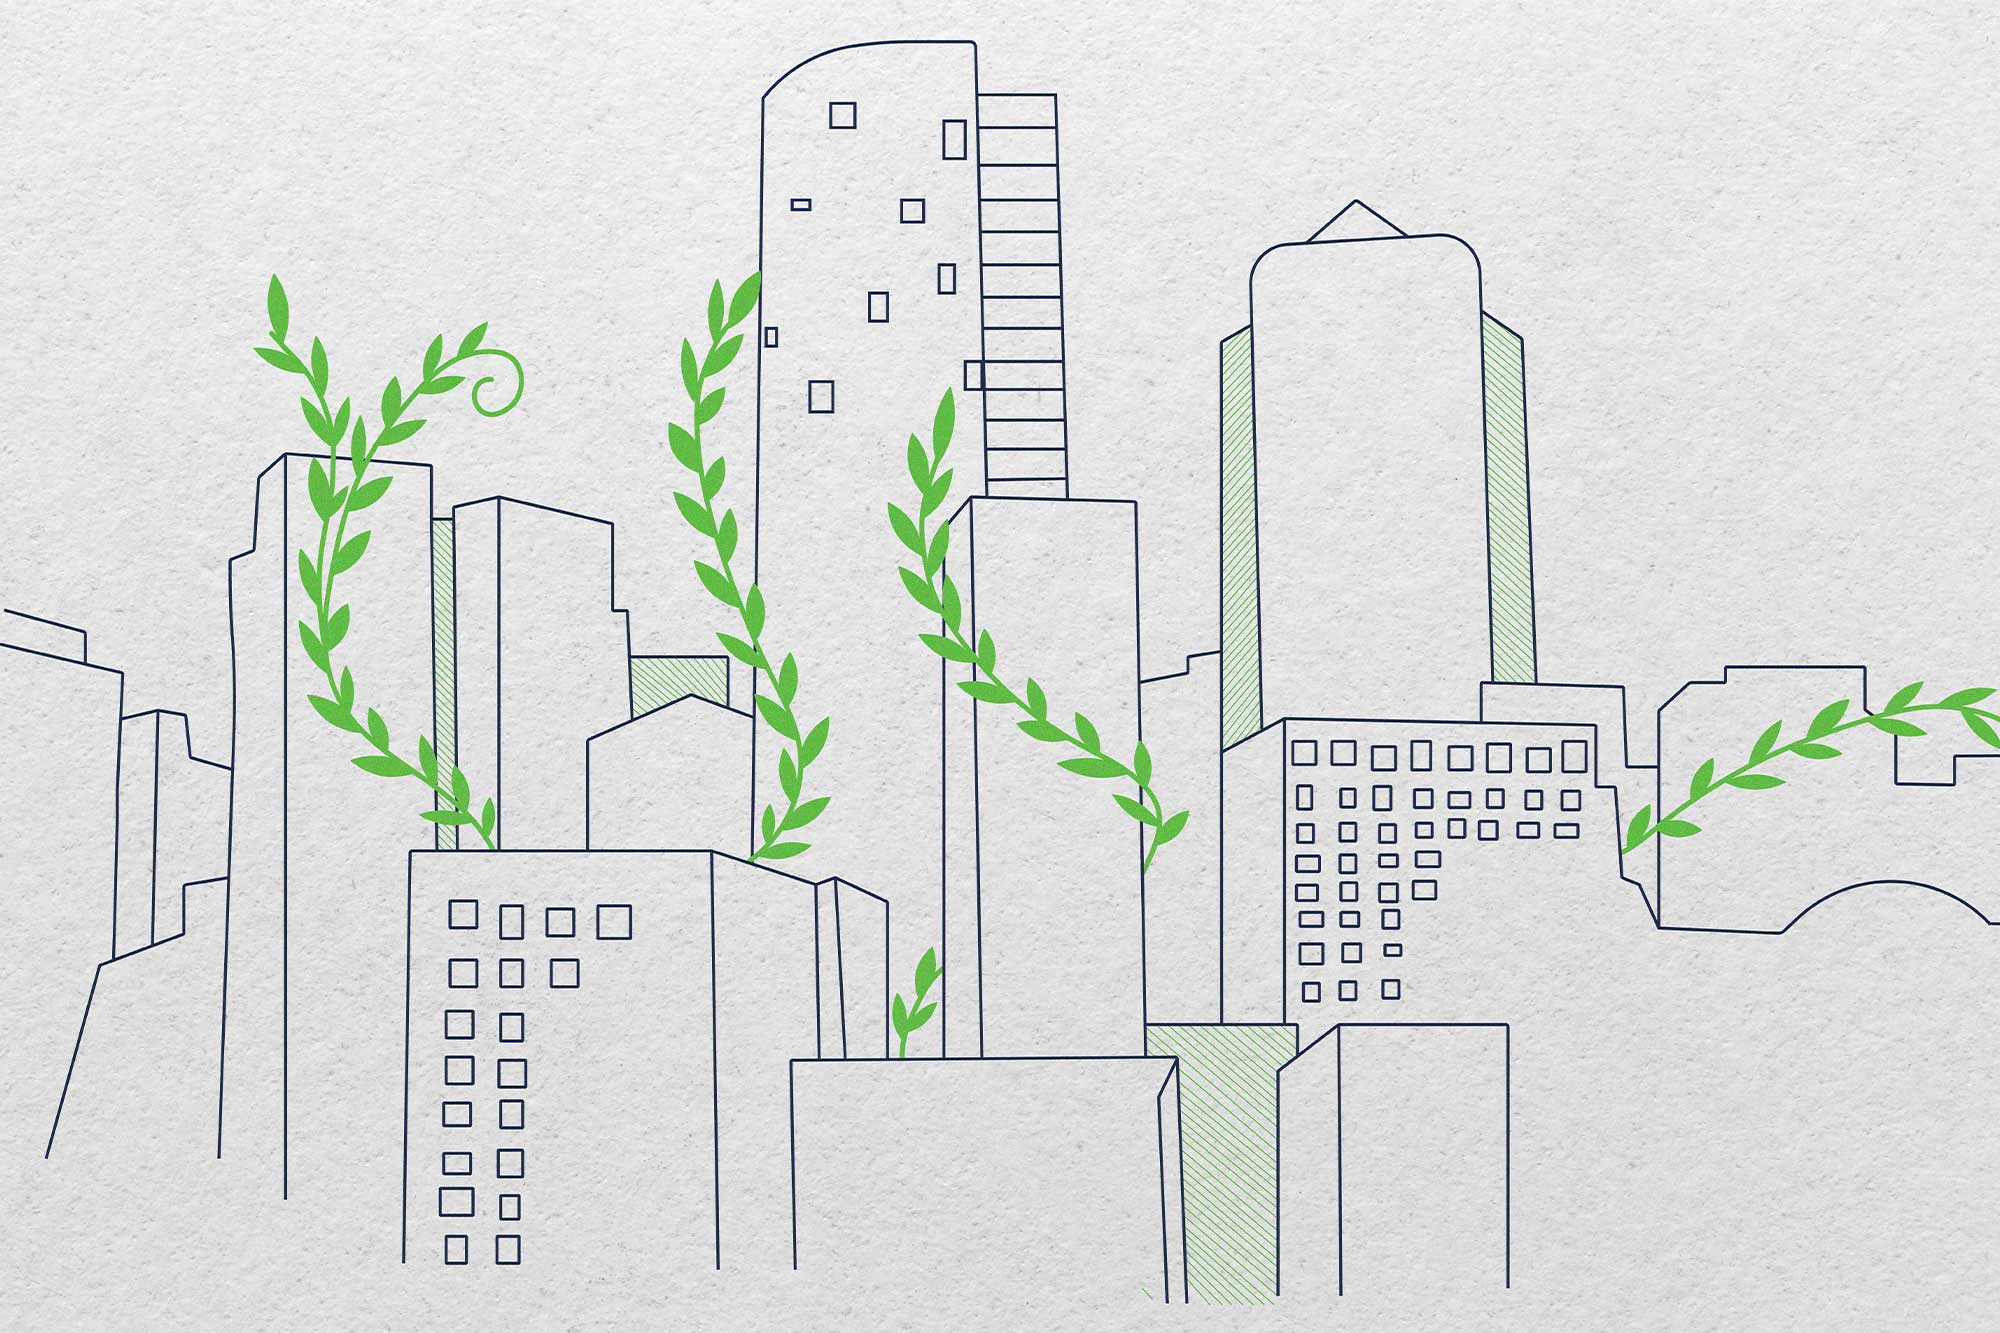 Green plants intertwined around line drawings of buildings